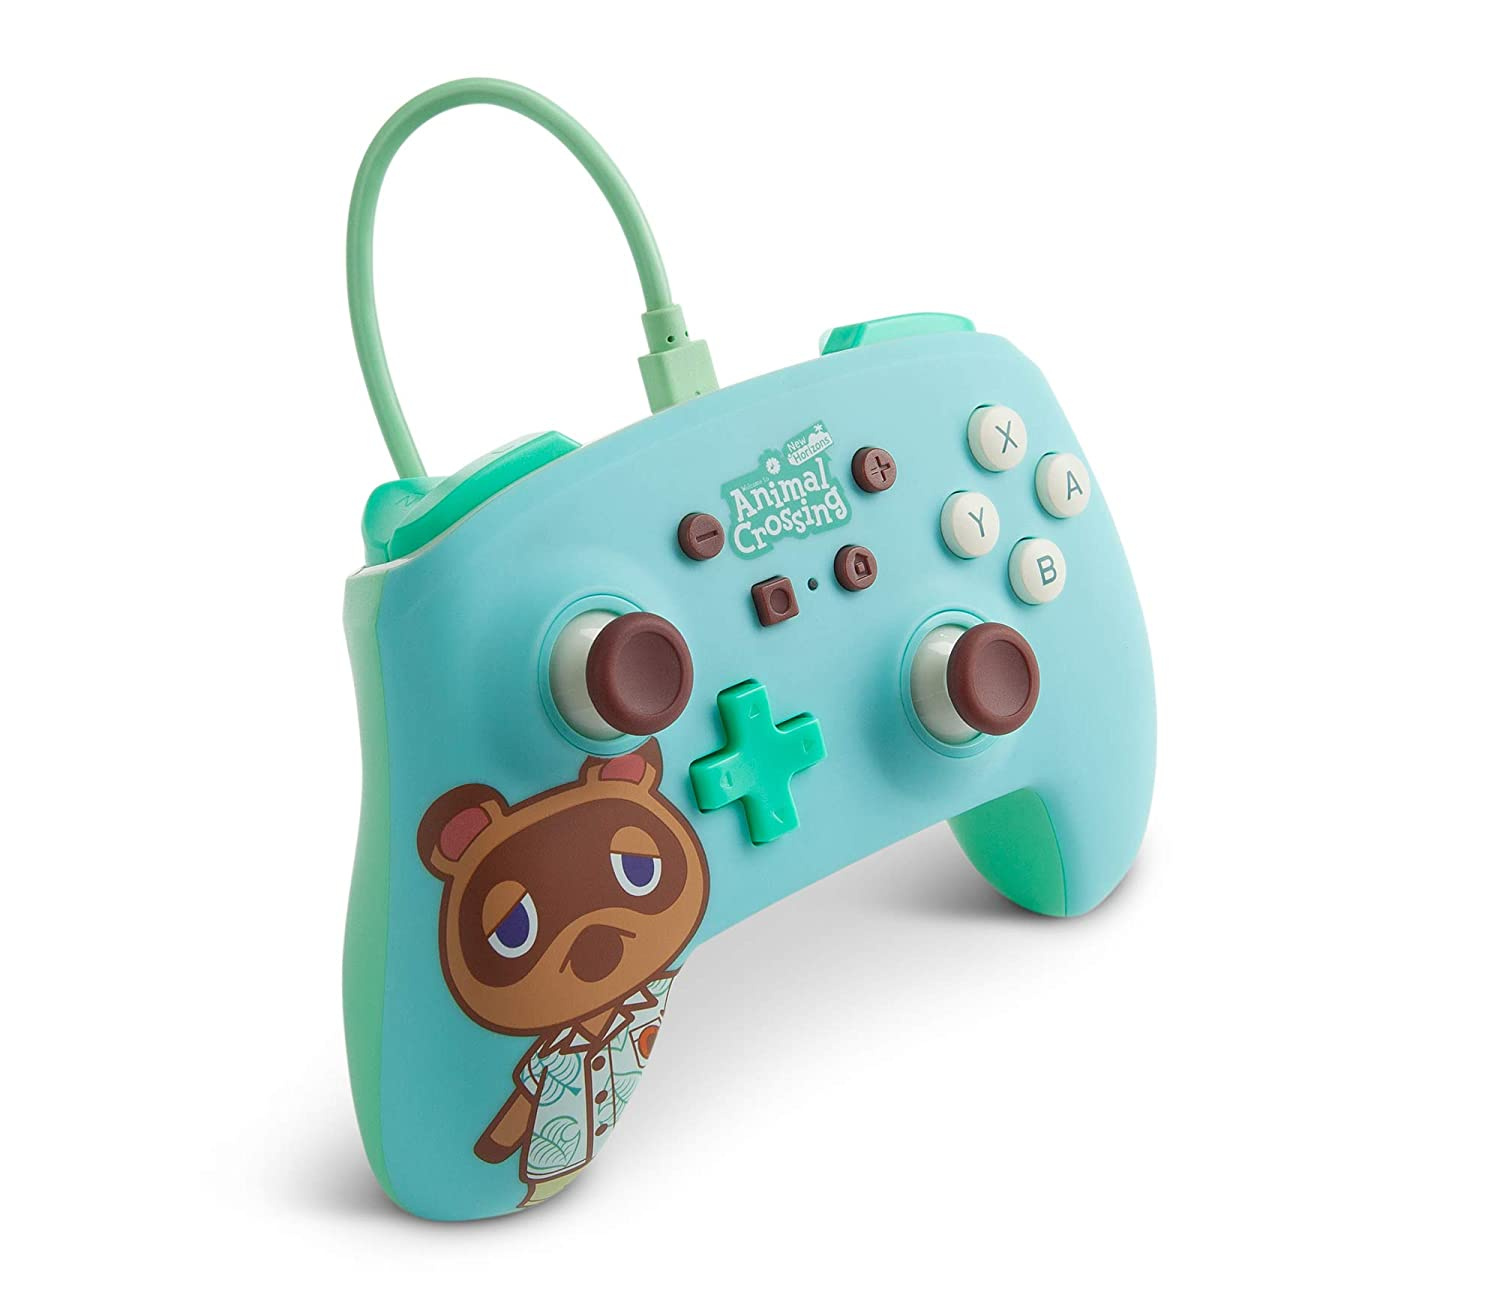 power a controller animal crossing